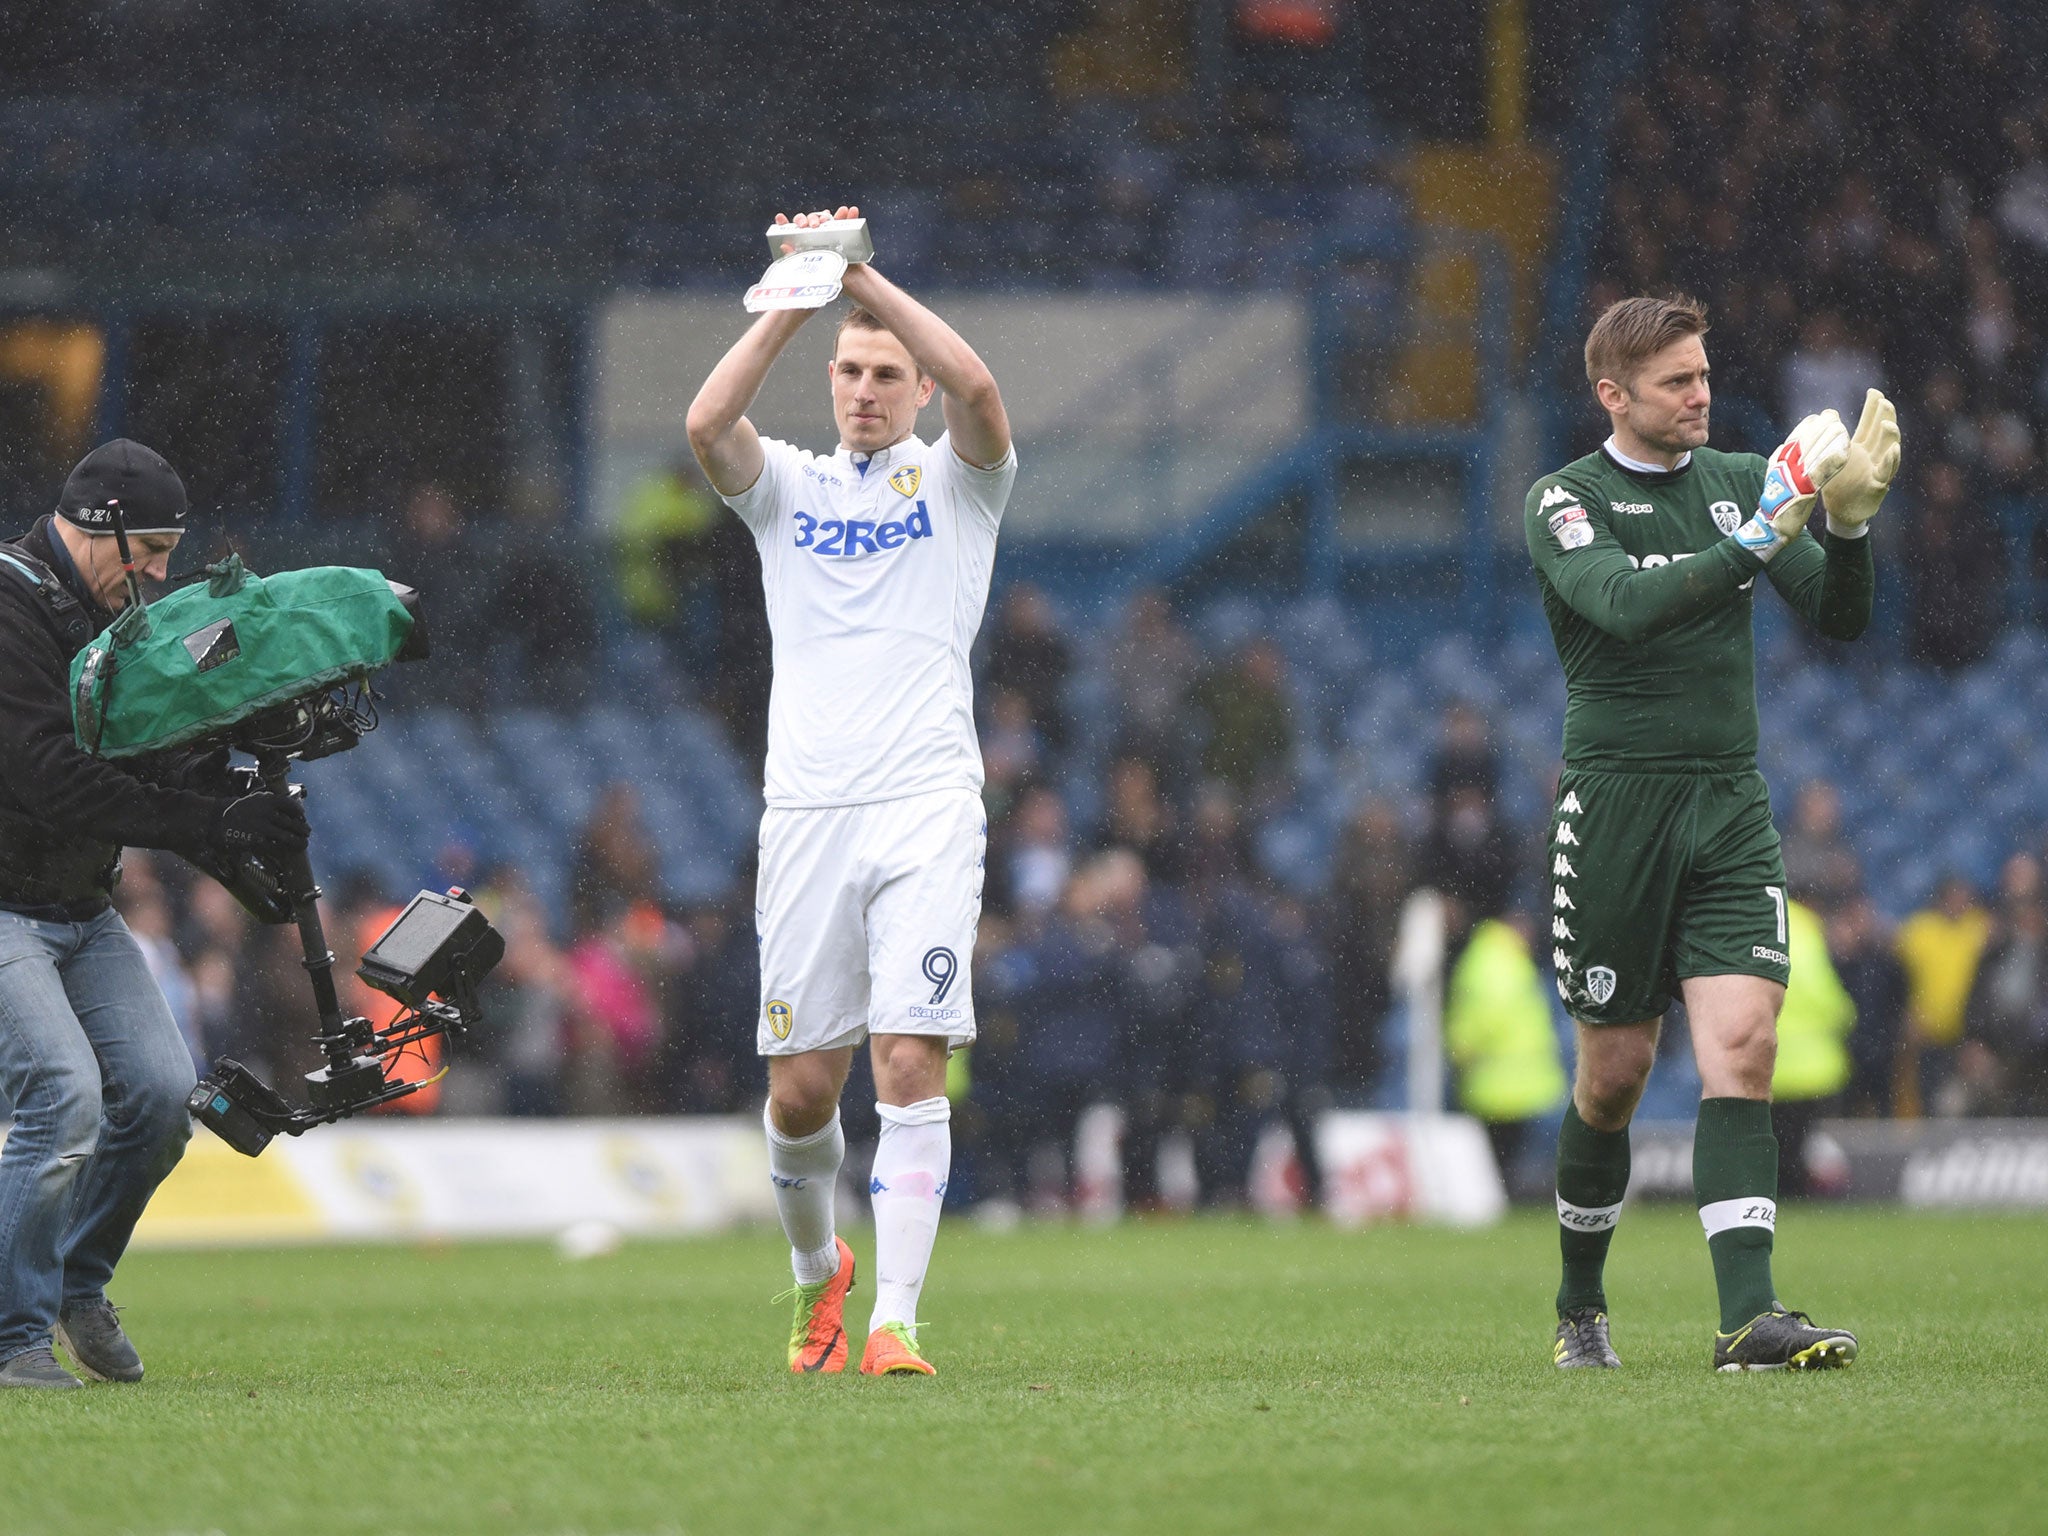 Leeds overcame Yorkshire rivals Sheffield Wednesday